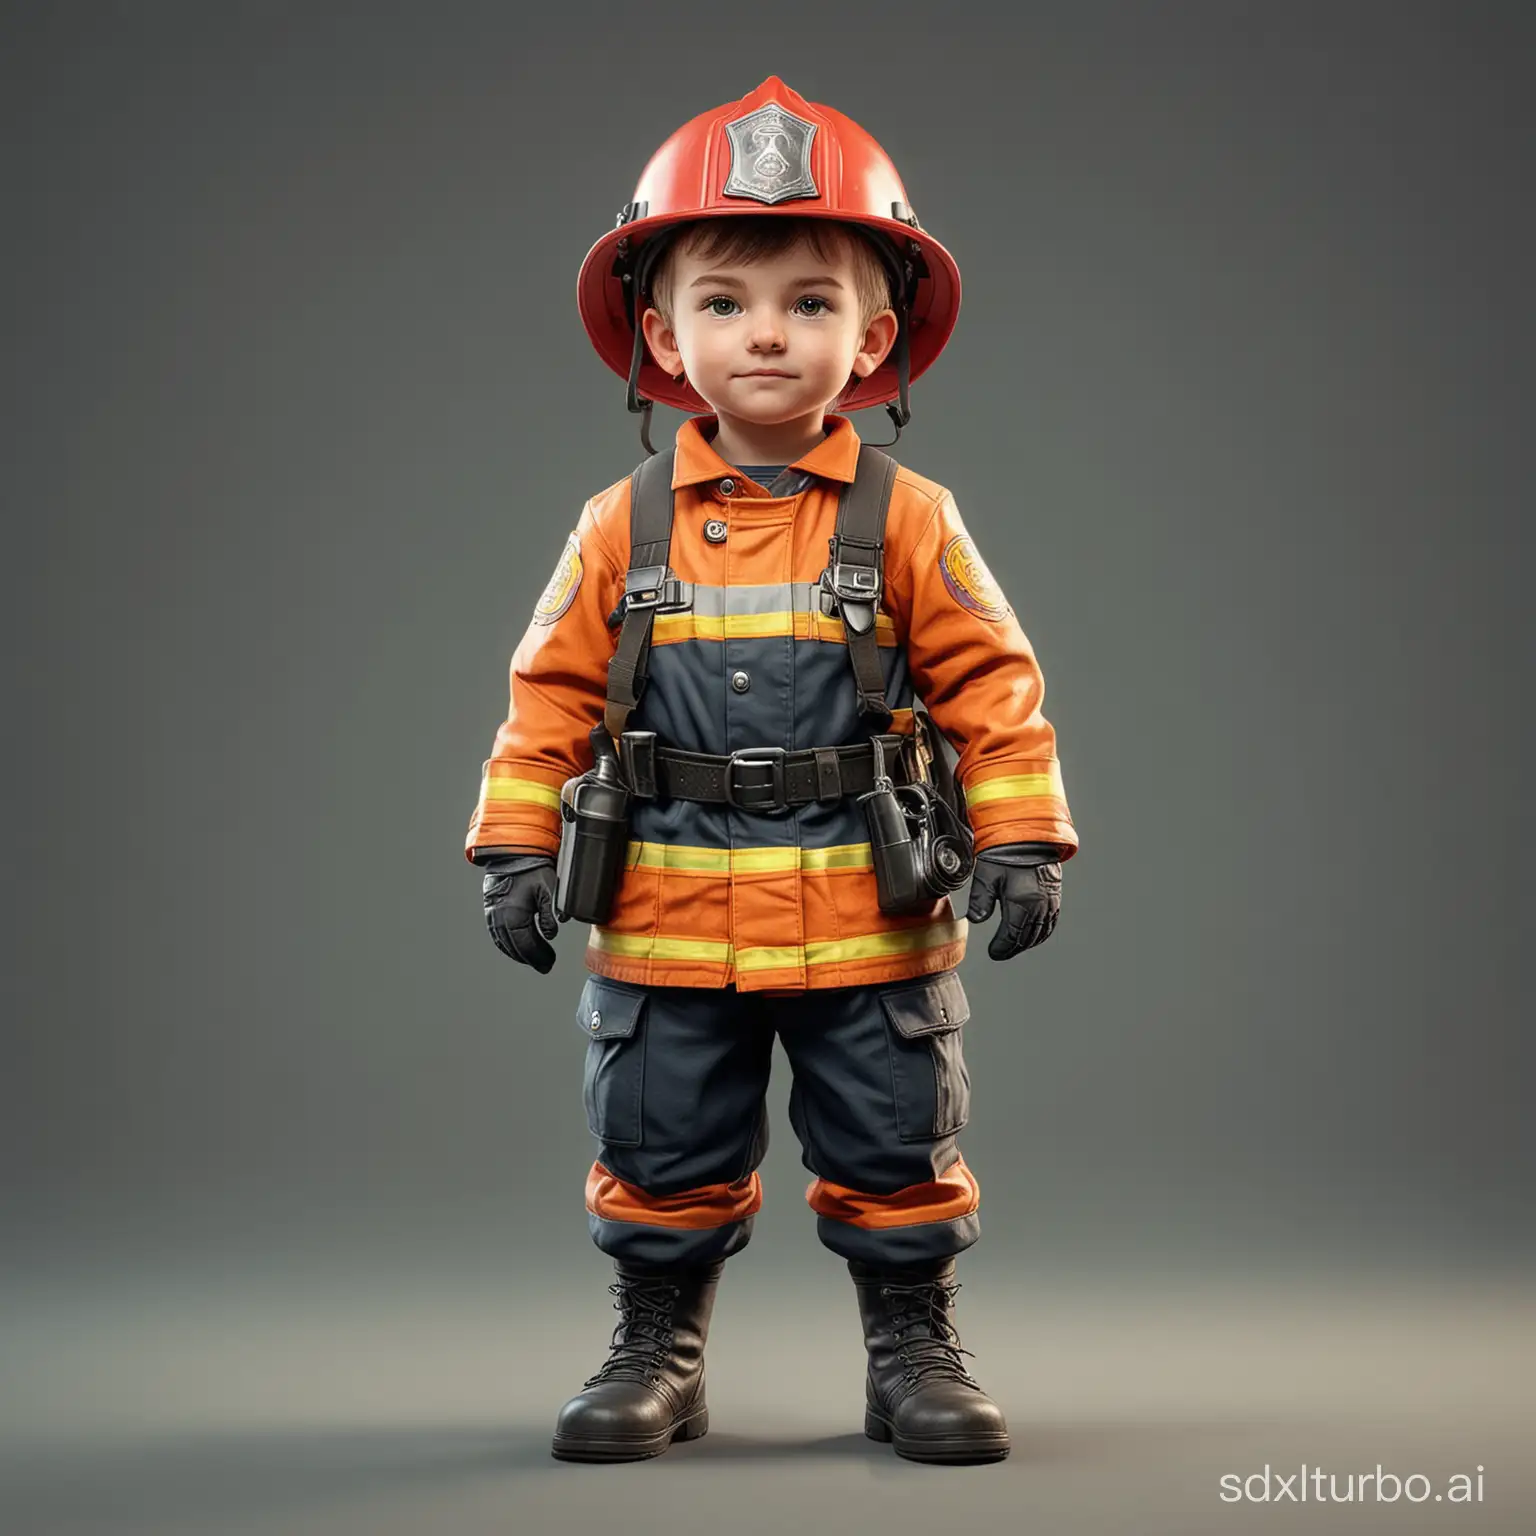 Adorable-Little-Child-Firefighter-Standing-Tall